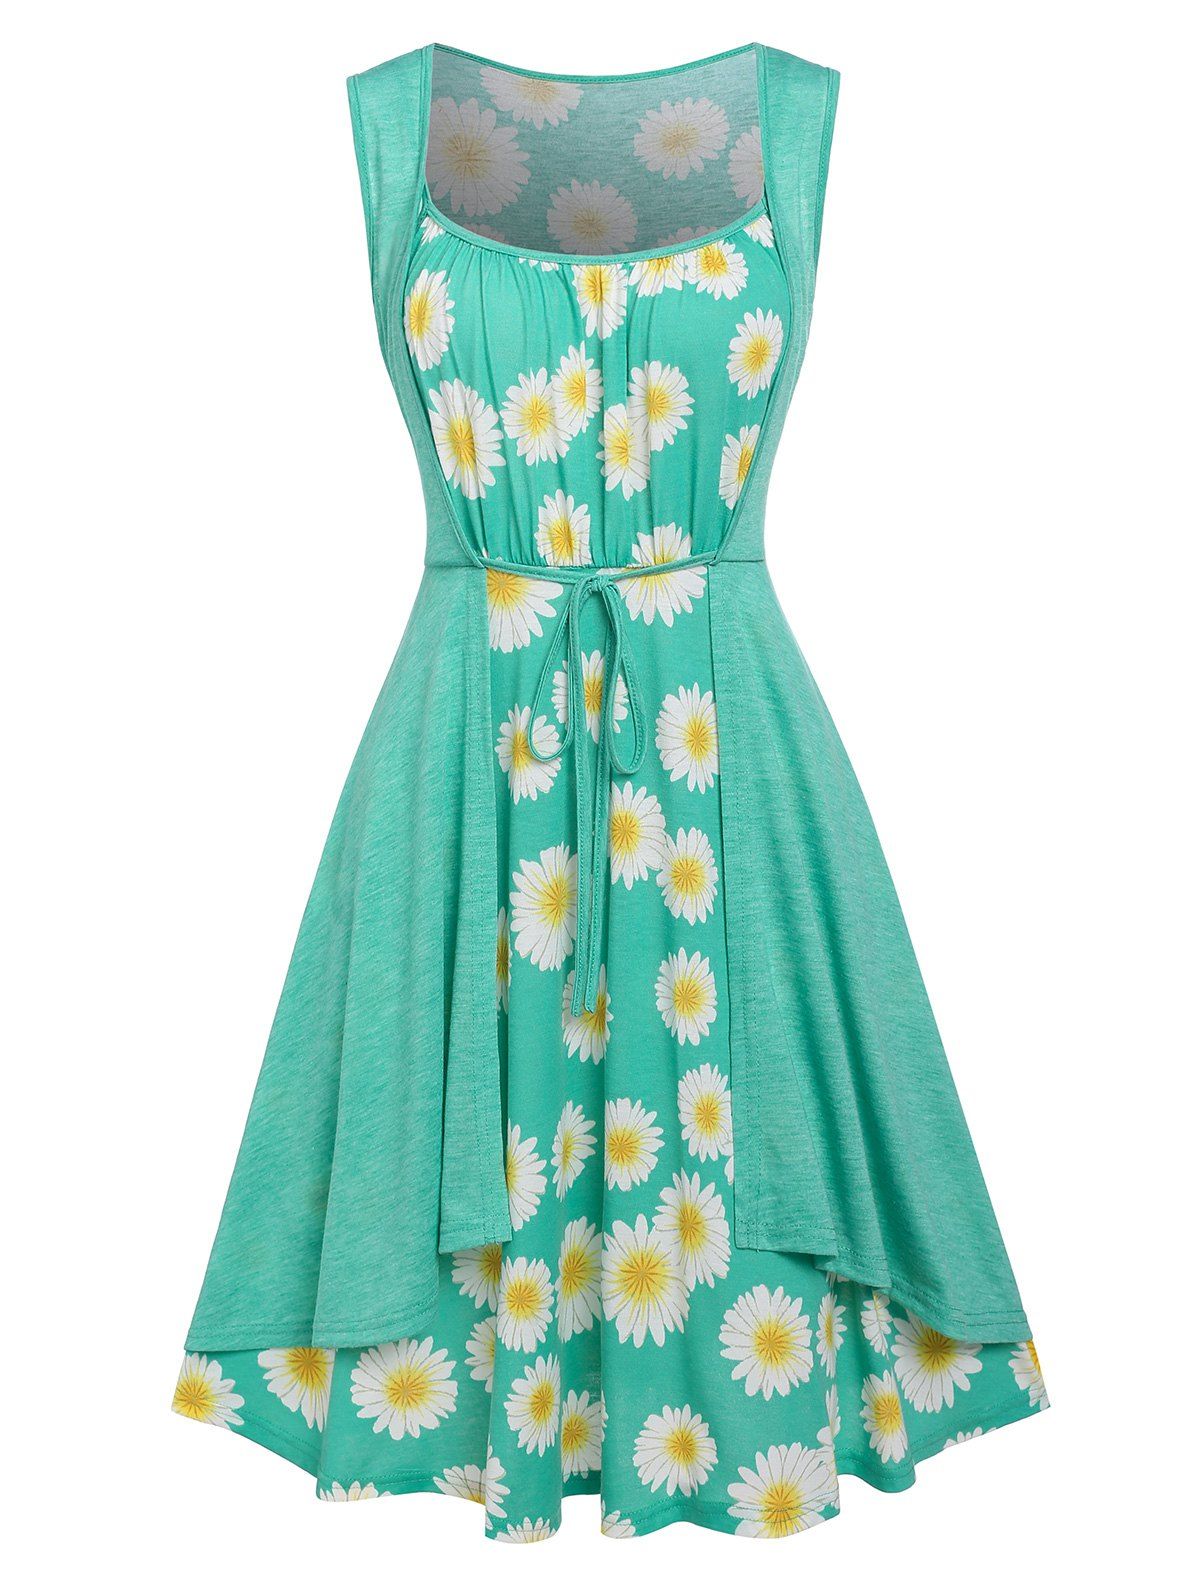 Summer Vacation Front Tie Daisy Print 2 in 1 A Line Mini Dress - GREEN M